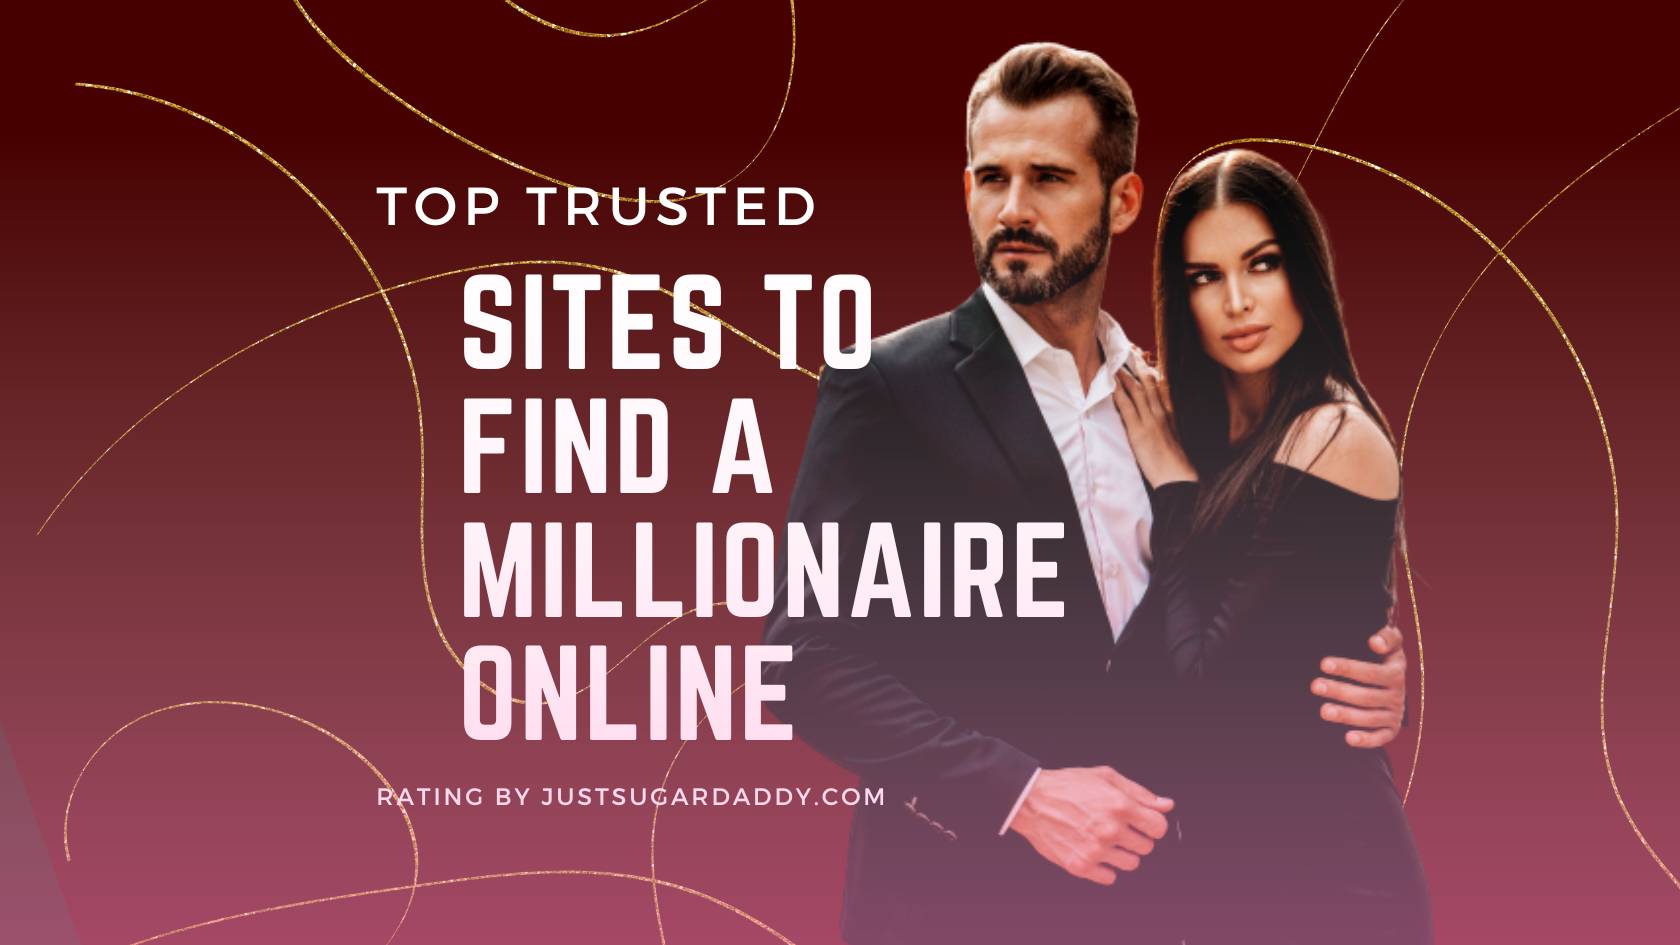 Get associated with elite singles: dating sites for rich women - Search ...